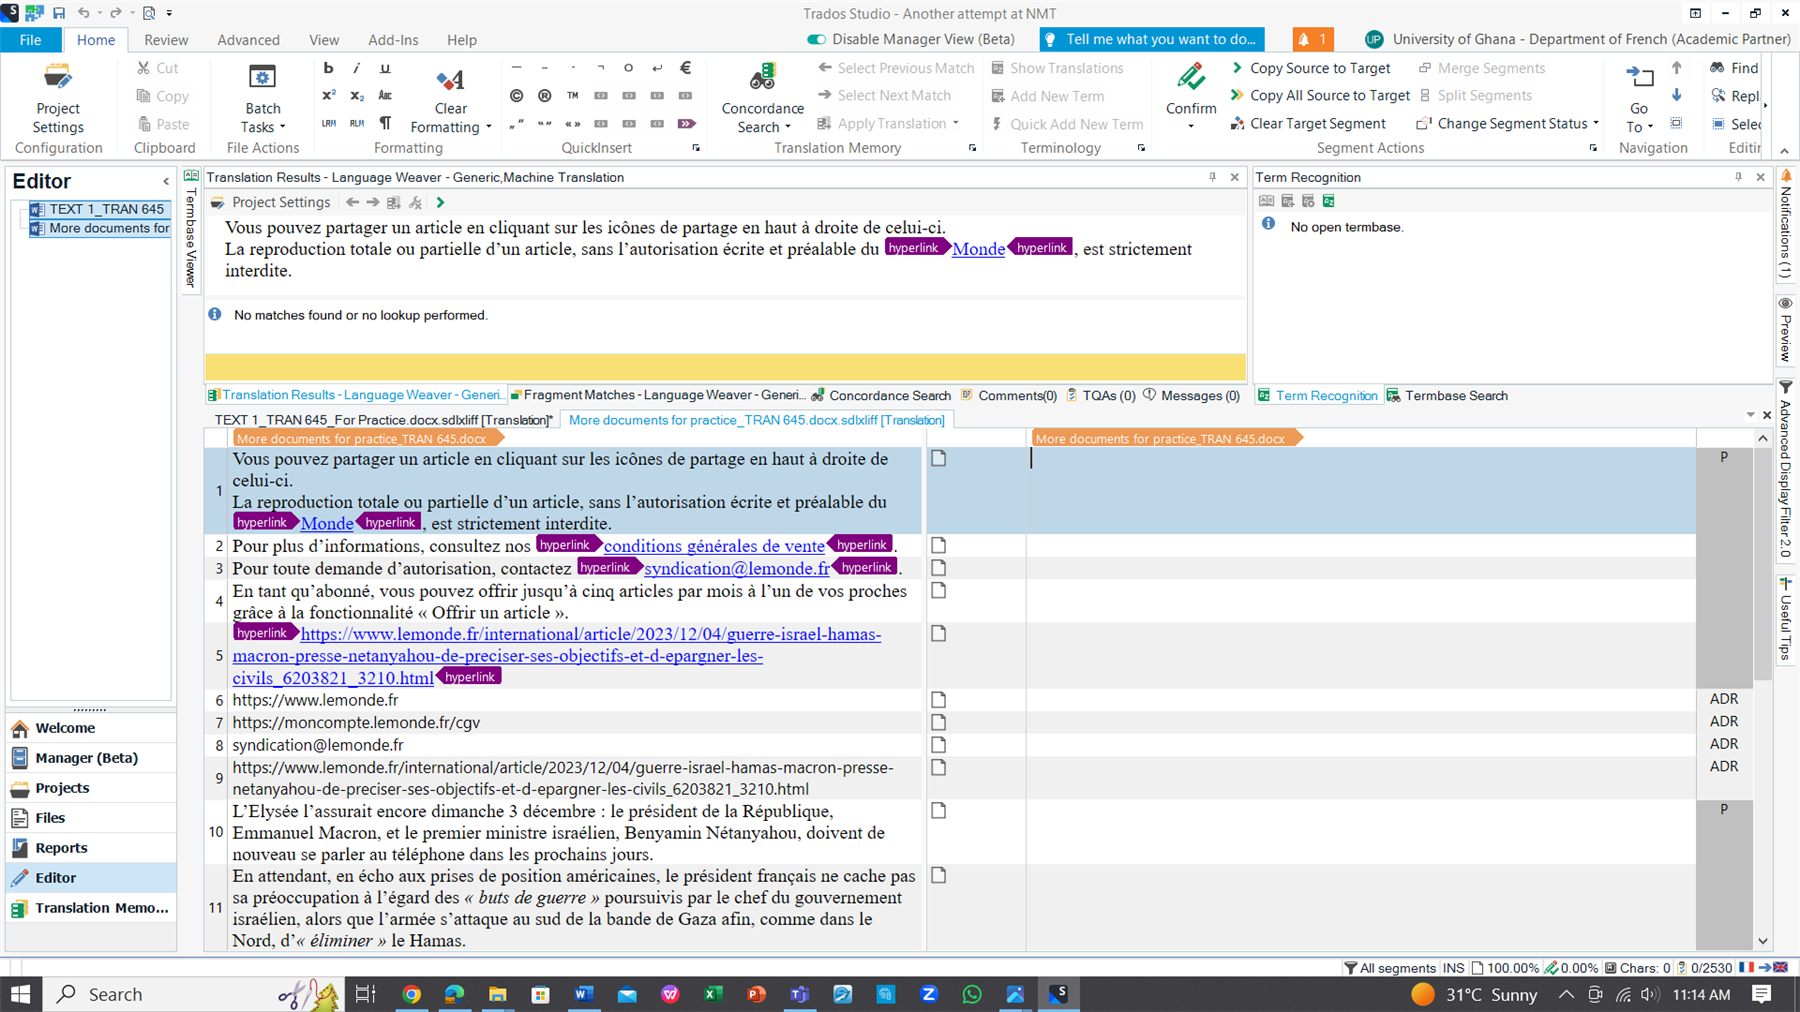 Screenshot of Trados Studio editor with a French to English translation segment open, Language Weaver pane showing 'No matches found or no lookup performed.'